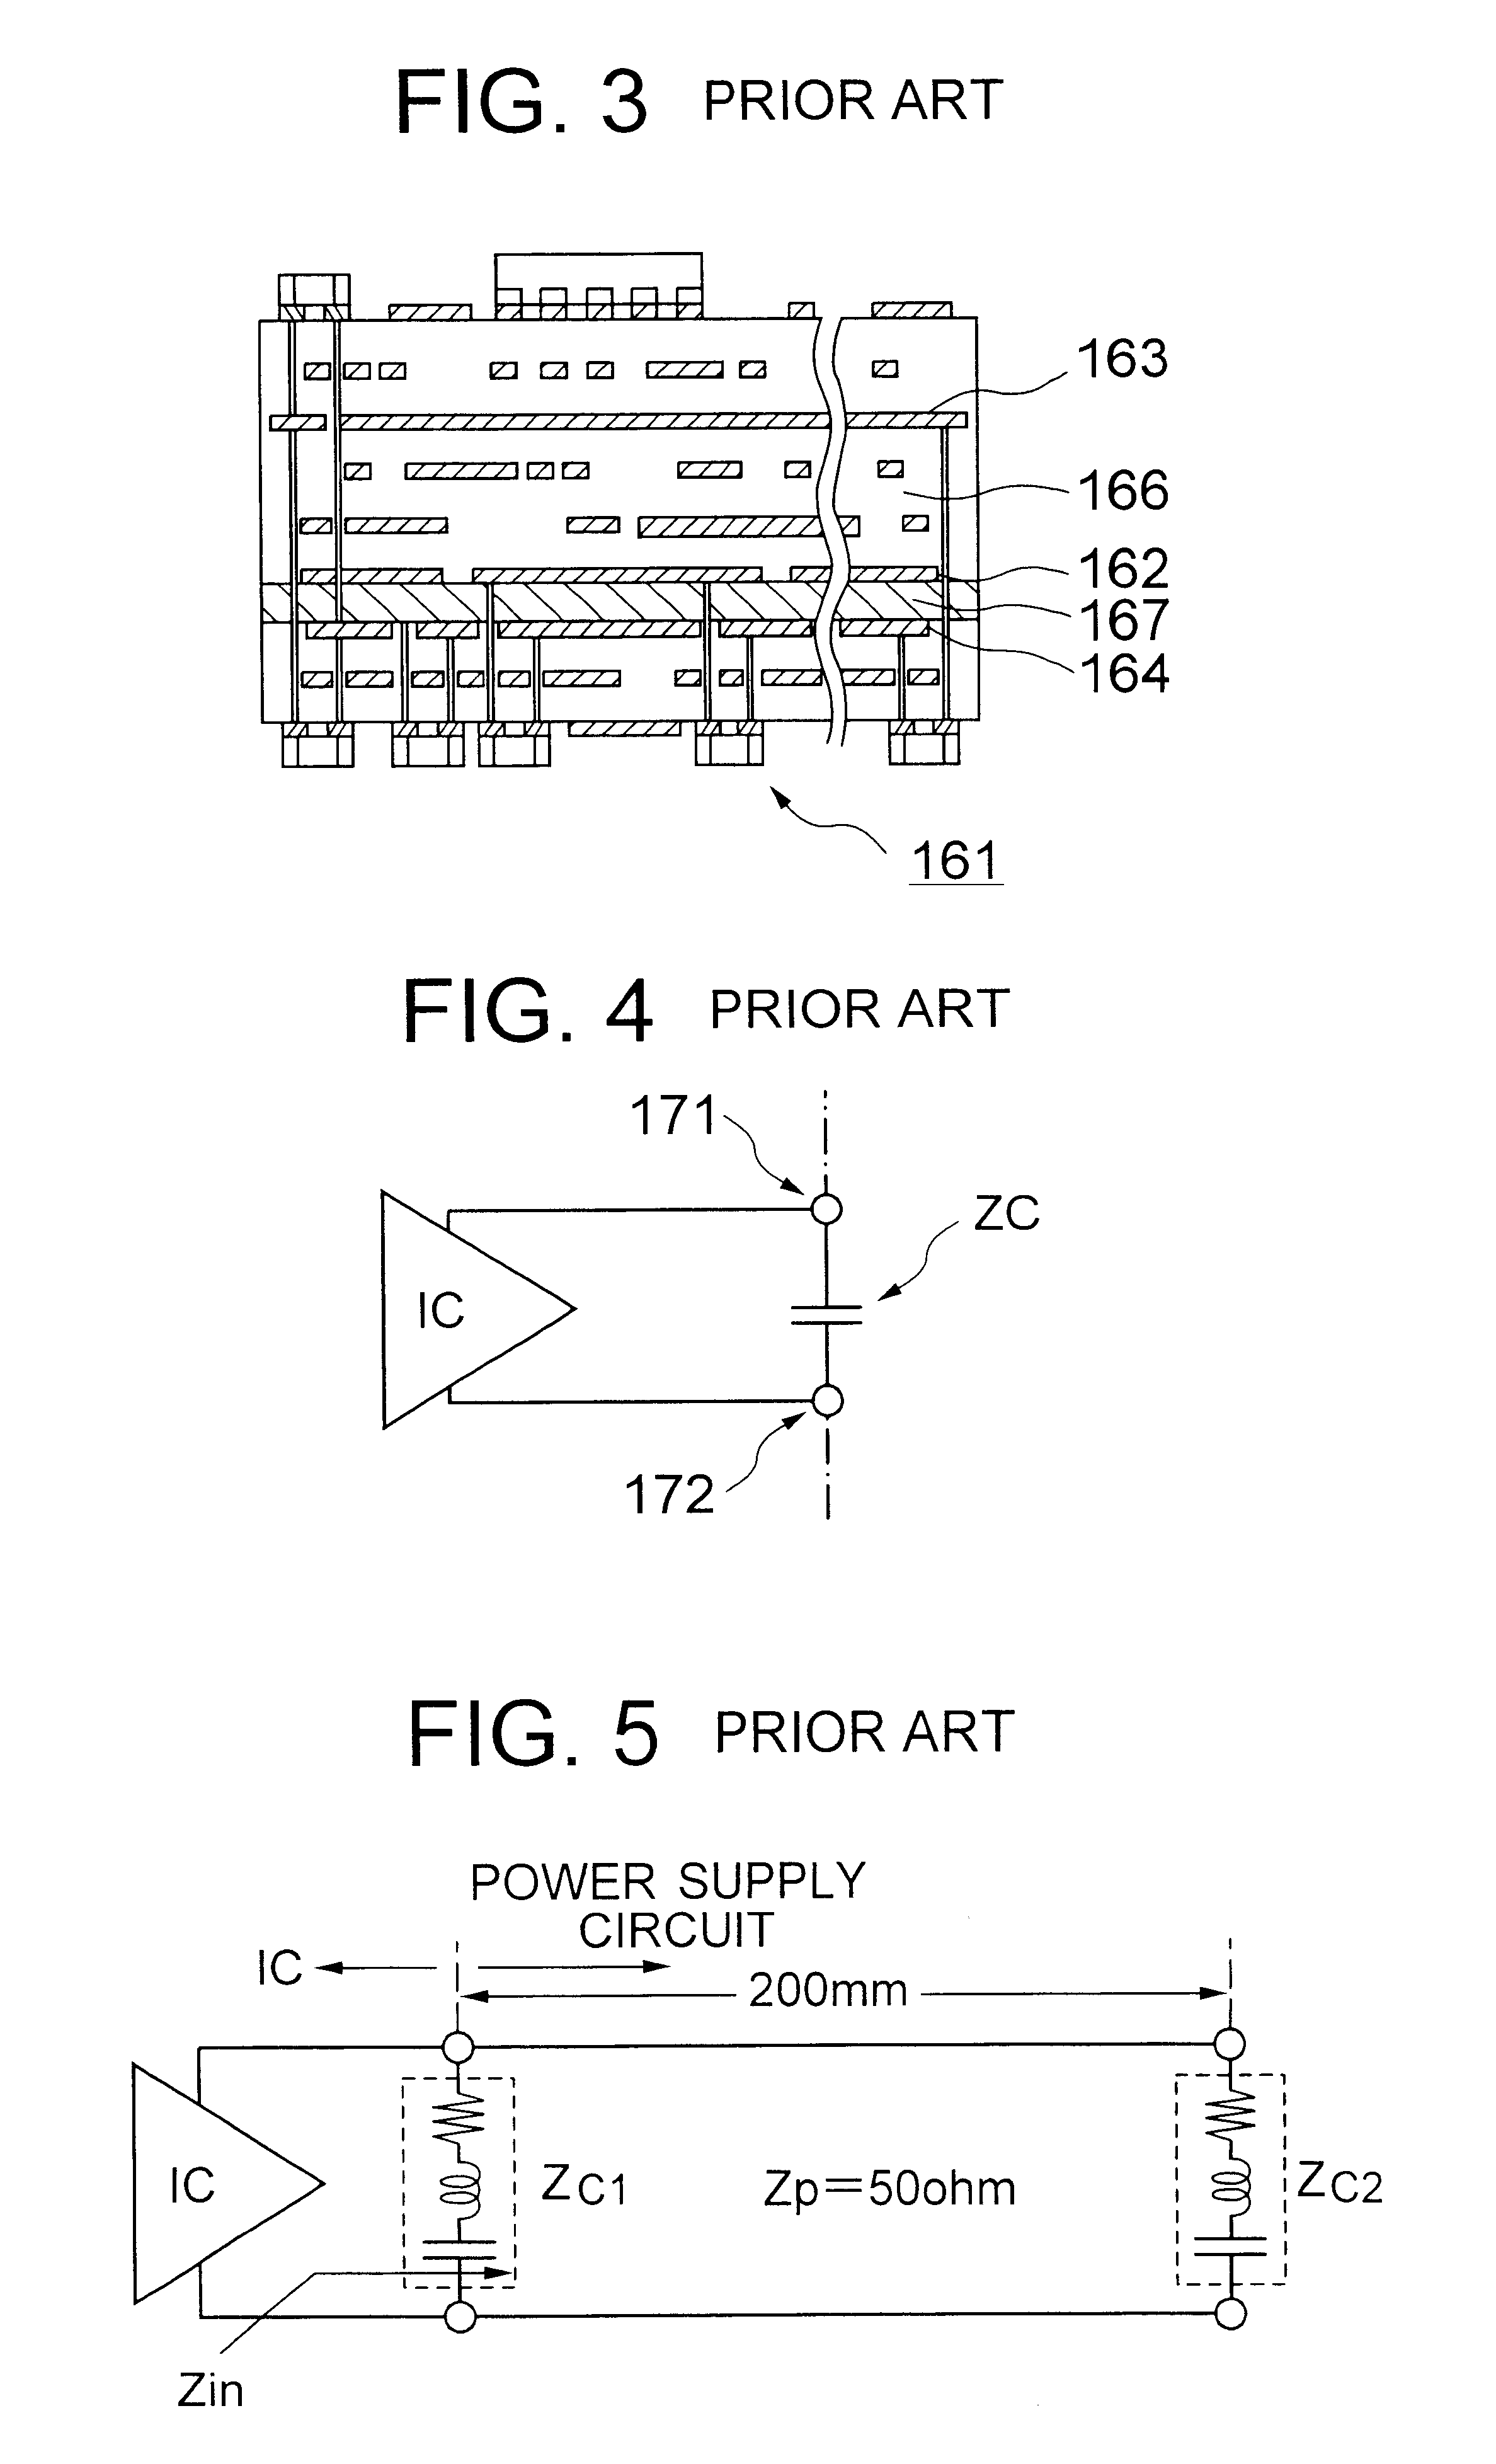 Wiring arrangement including capacitors for suppressing electromagnetic wave radiation from a printed circuit board